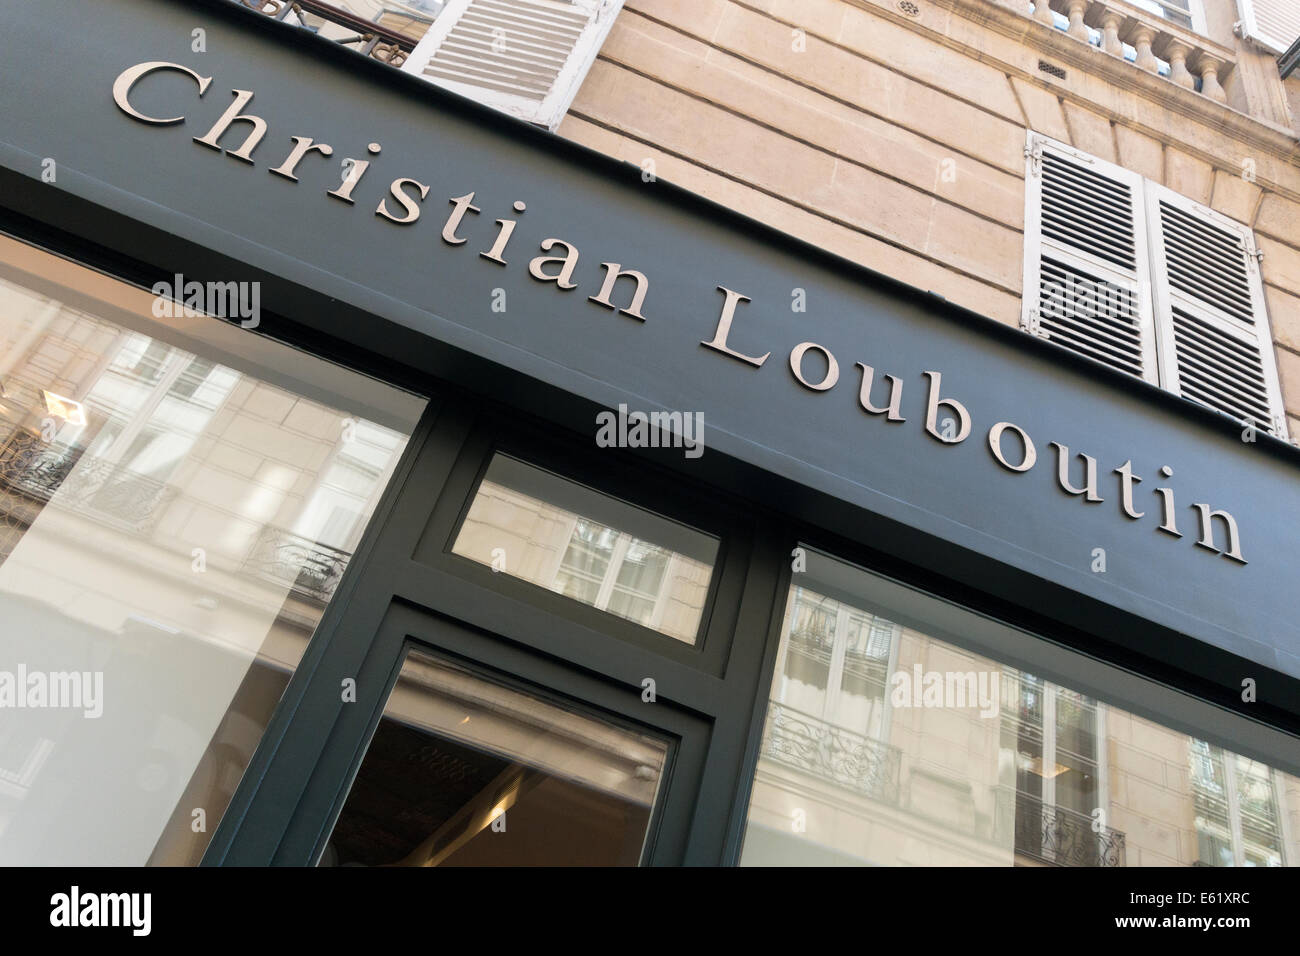 Christian Louboutin brand name on the facade of his Paris haute couture famous shoe designer store shop Stock Photo